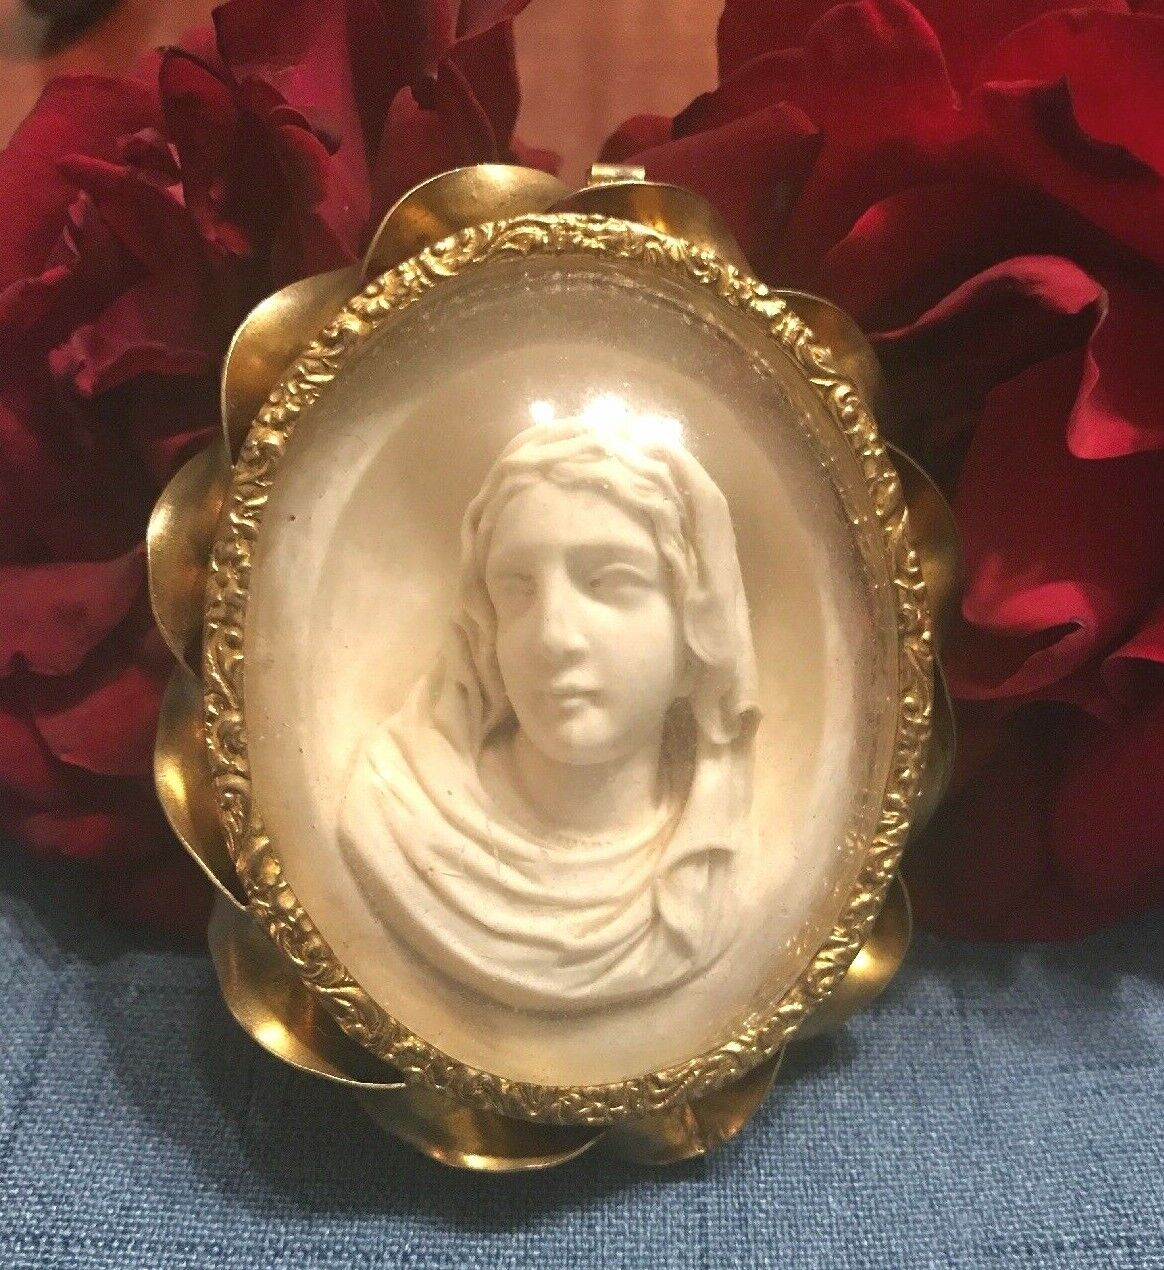 A Rare Antique VIRGIN MARY CARVING IN GILDED METAL FRAME RARE Large 1861